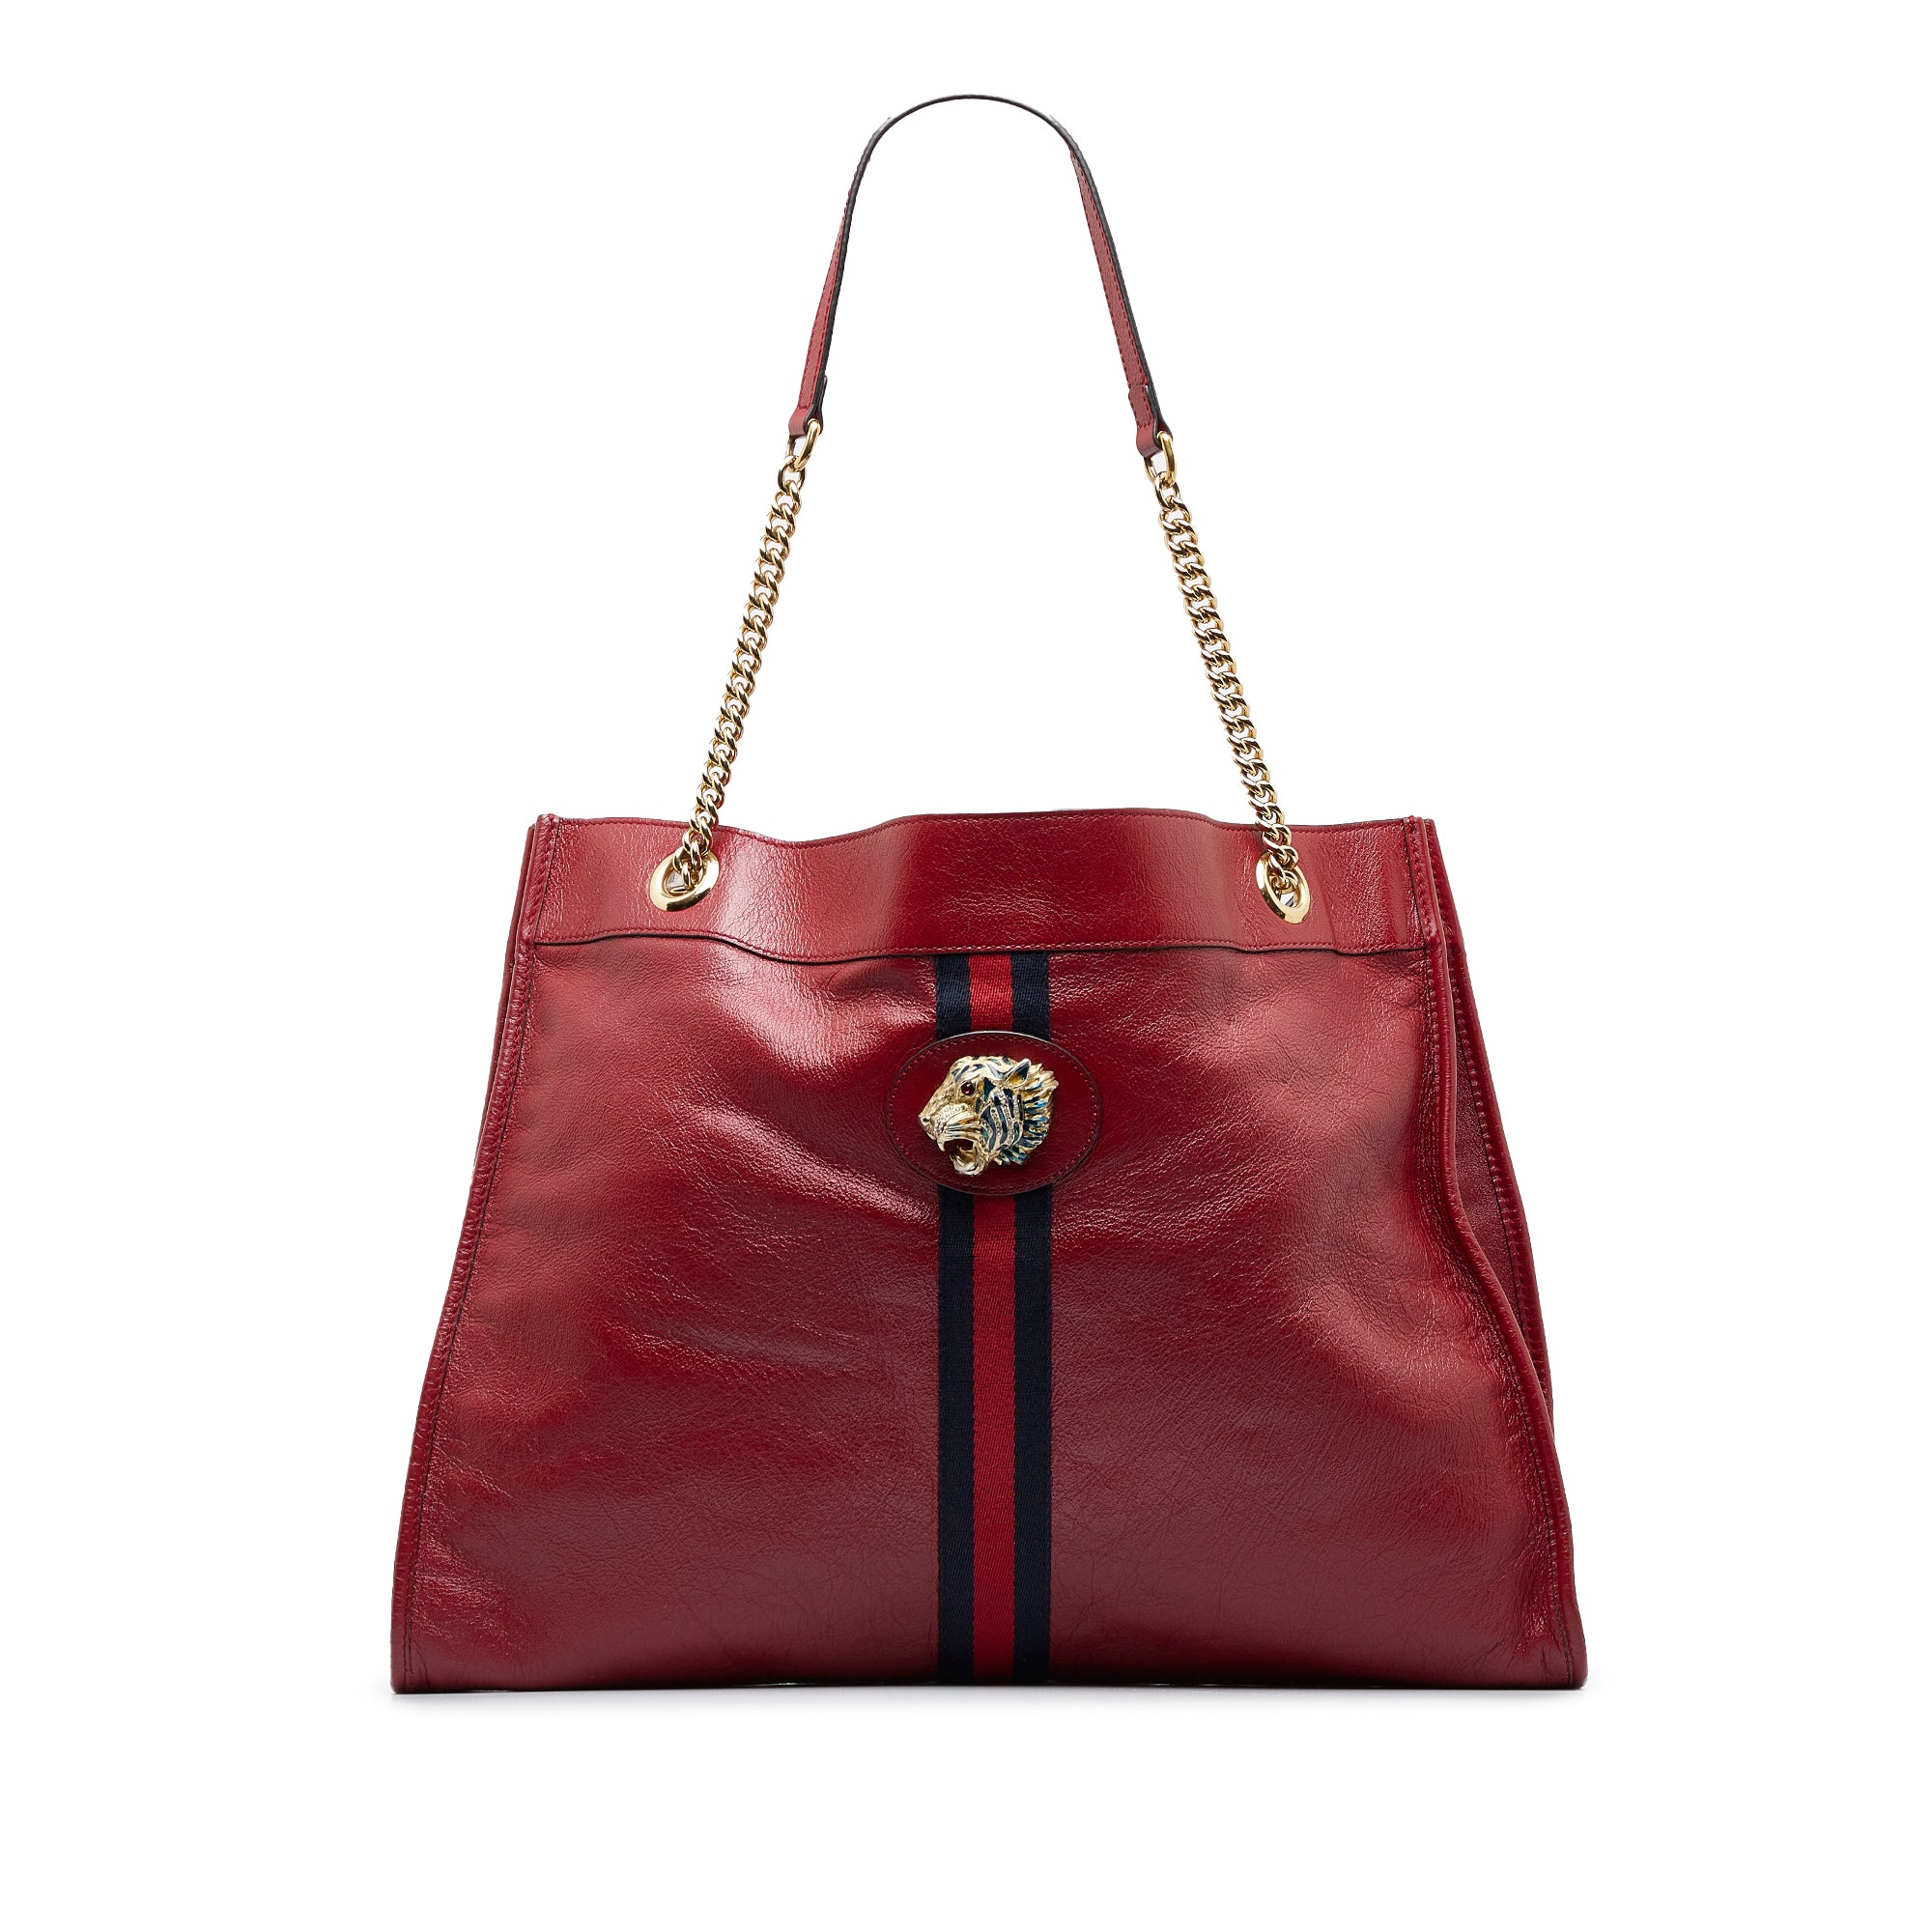 Gucci Leather RAJAH Tote bag women - Glamood Outlet